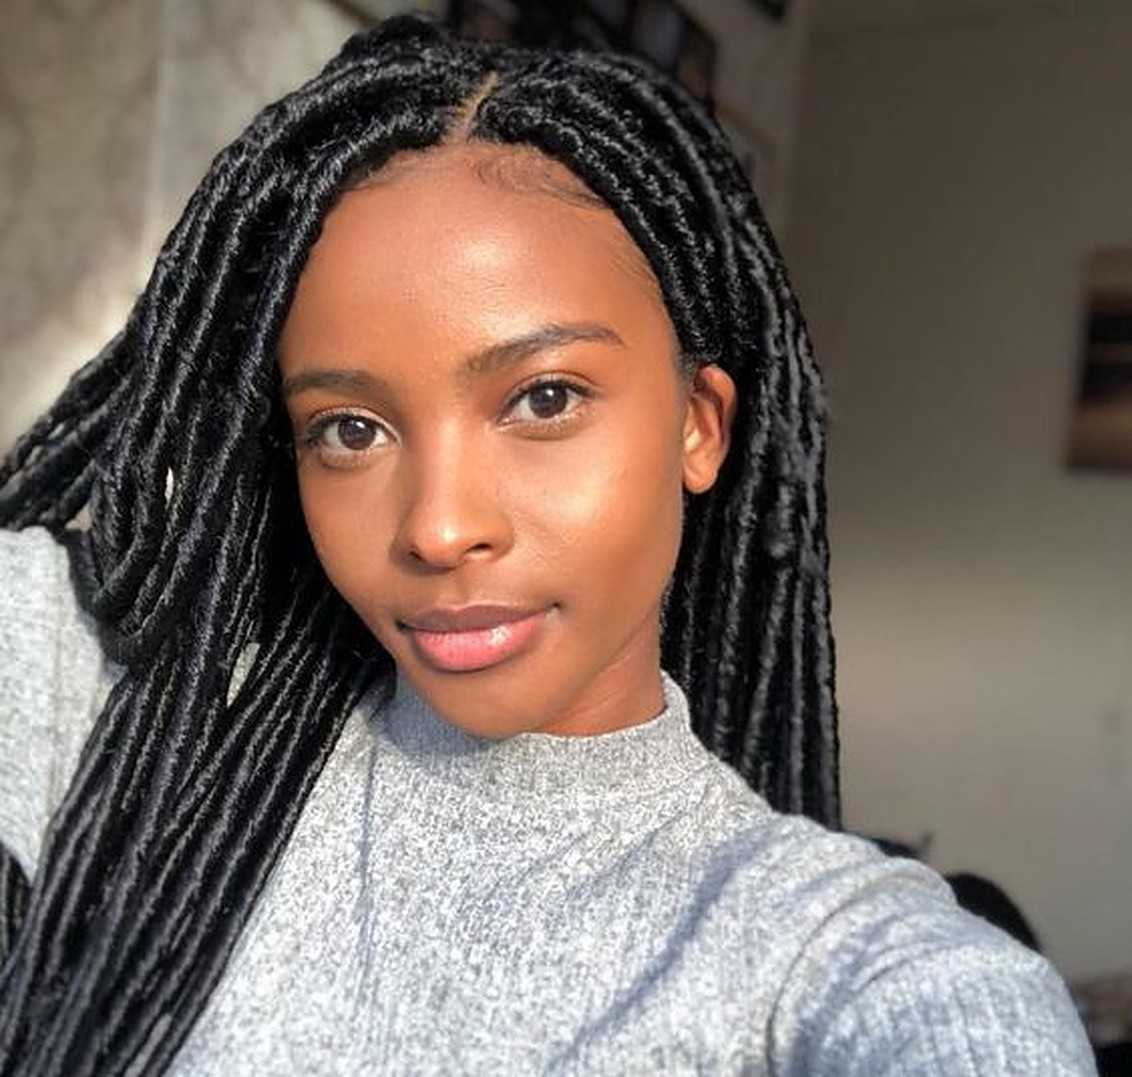 You may go for faux locs braids if your hair is prone to frizz up.